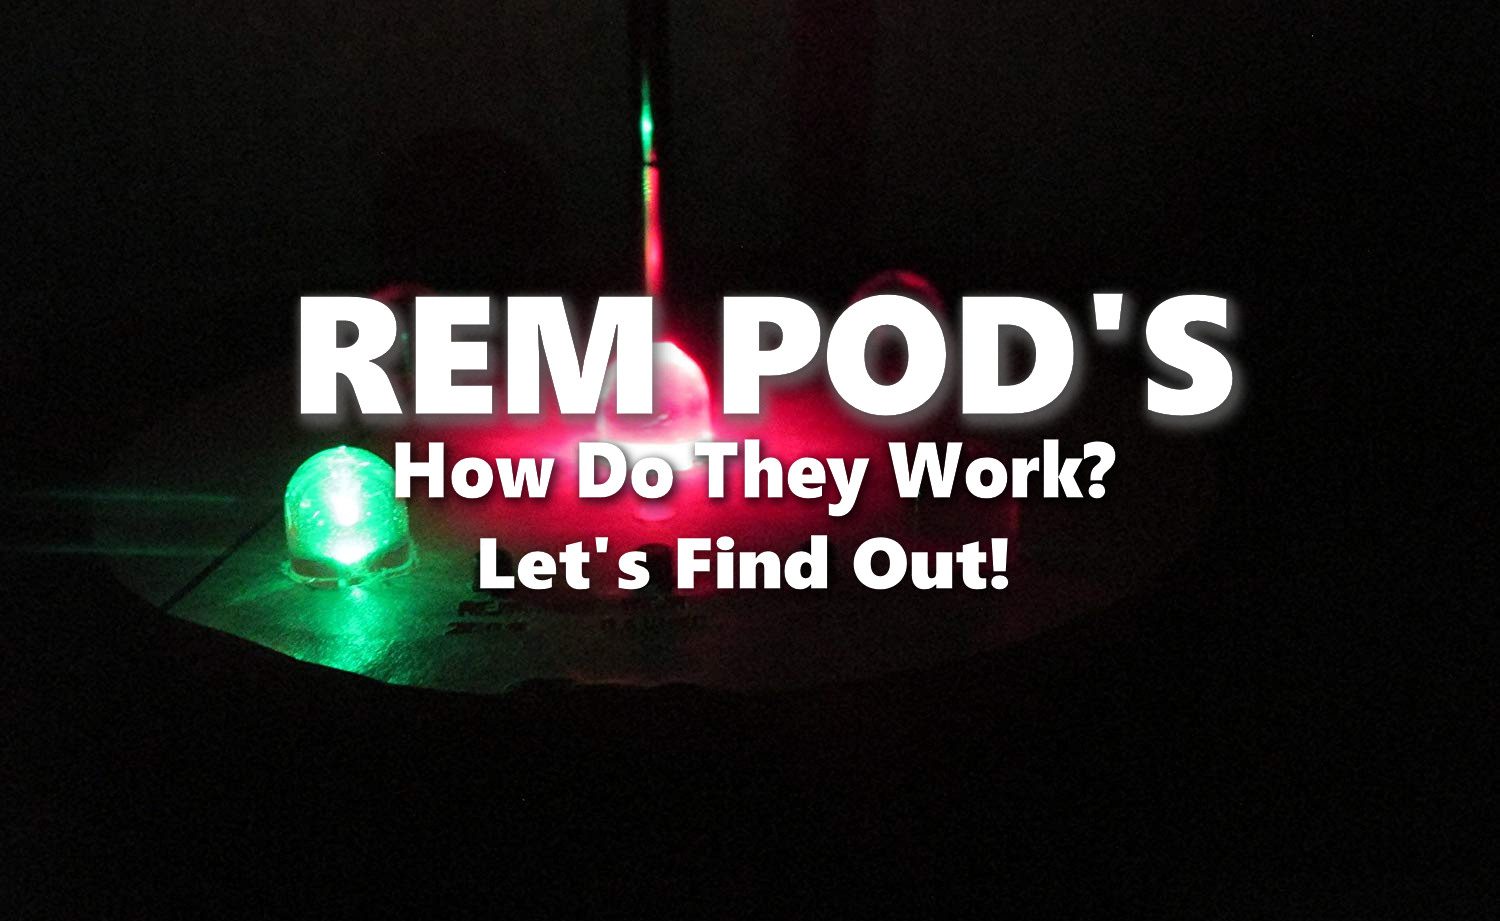 Explain how REM Pods work for Ghost Hunting